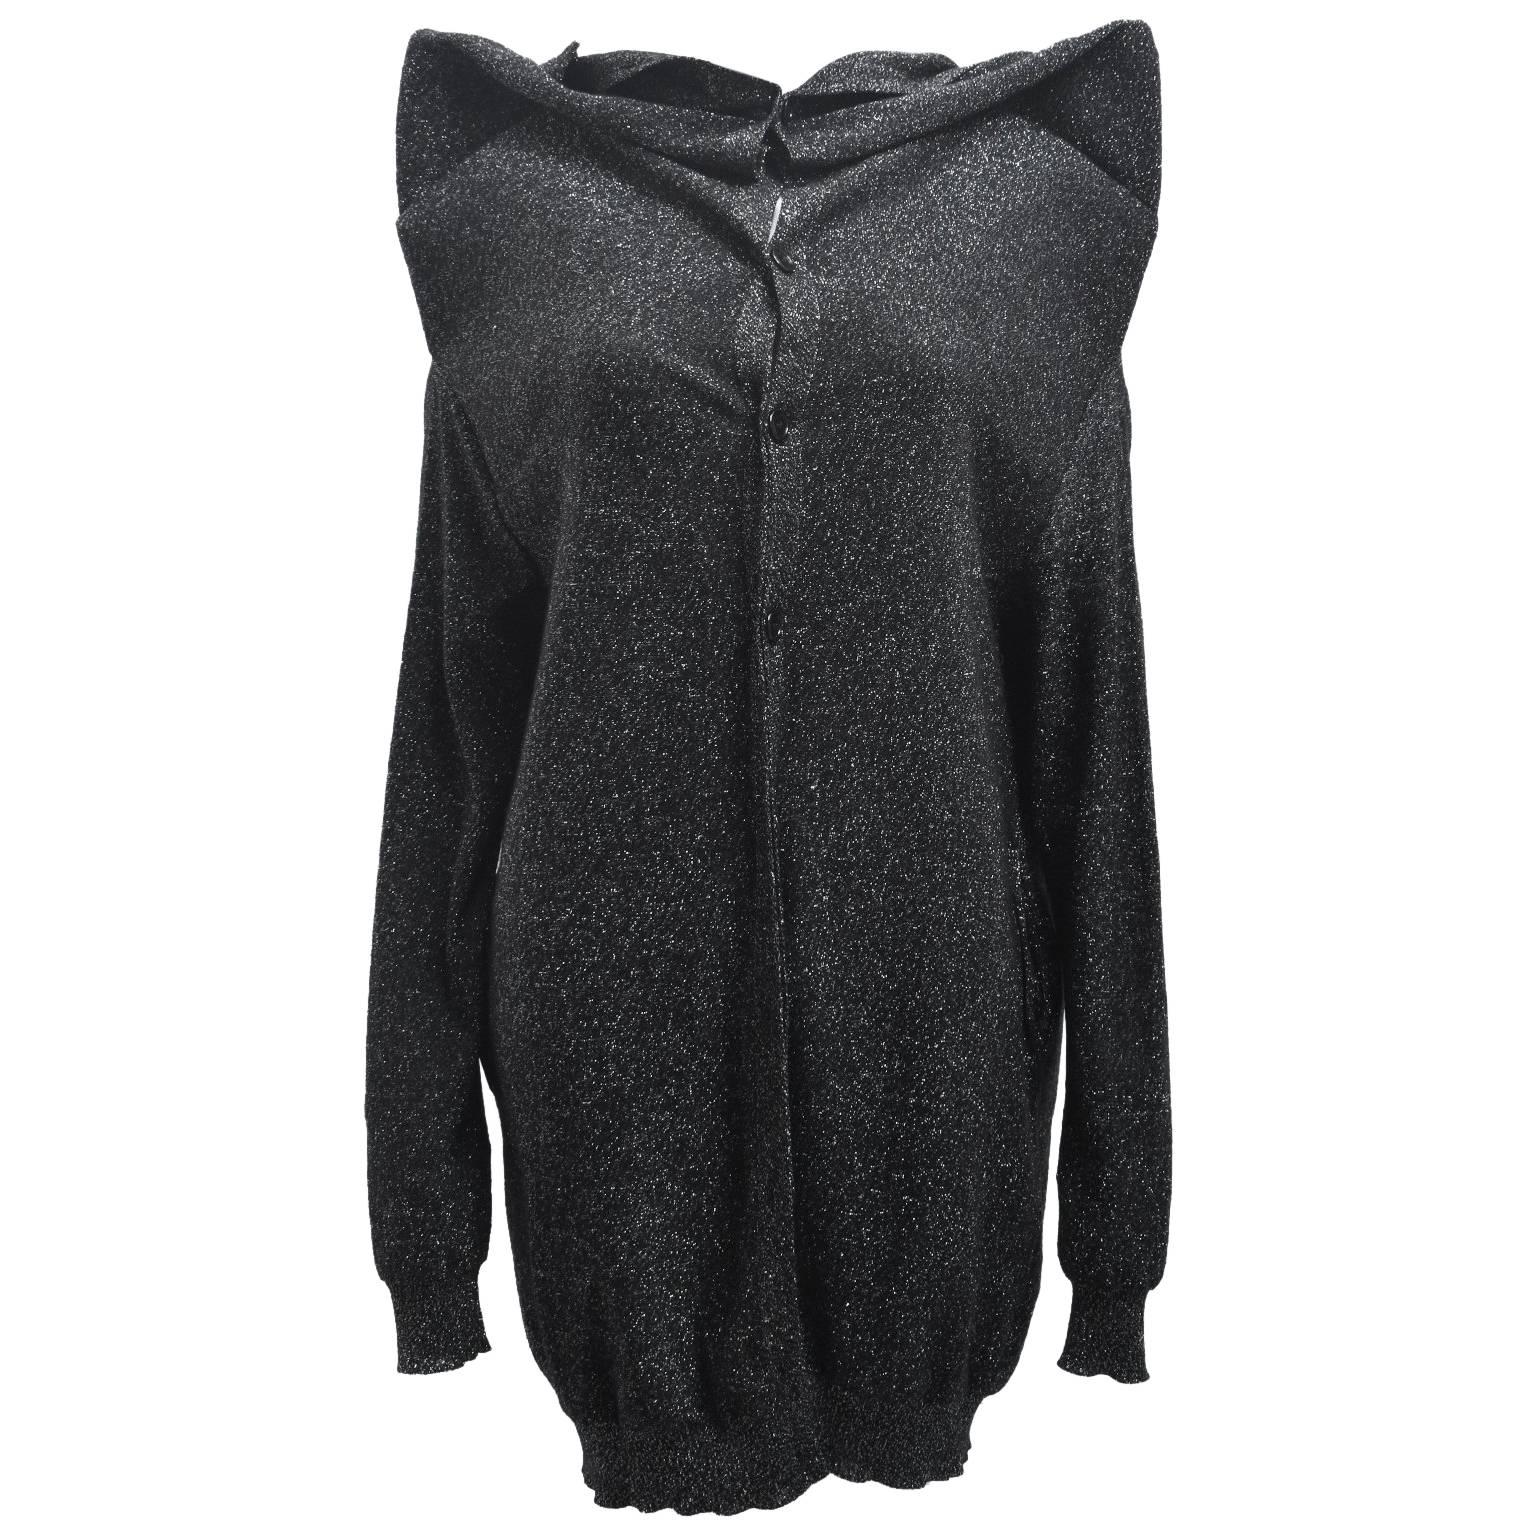 Maison Martin Margiela Black and Silver Glitter Knit with Exaggerated Shoulders For Sale